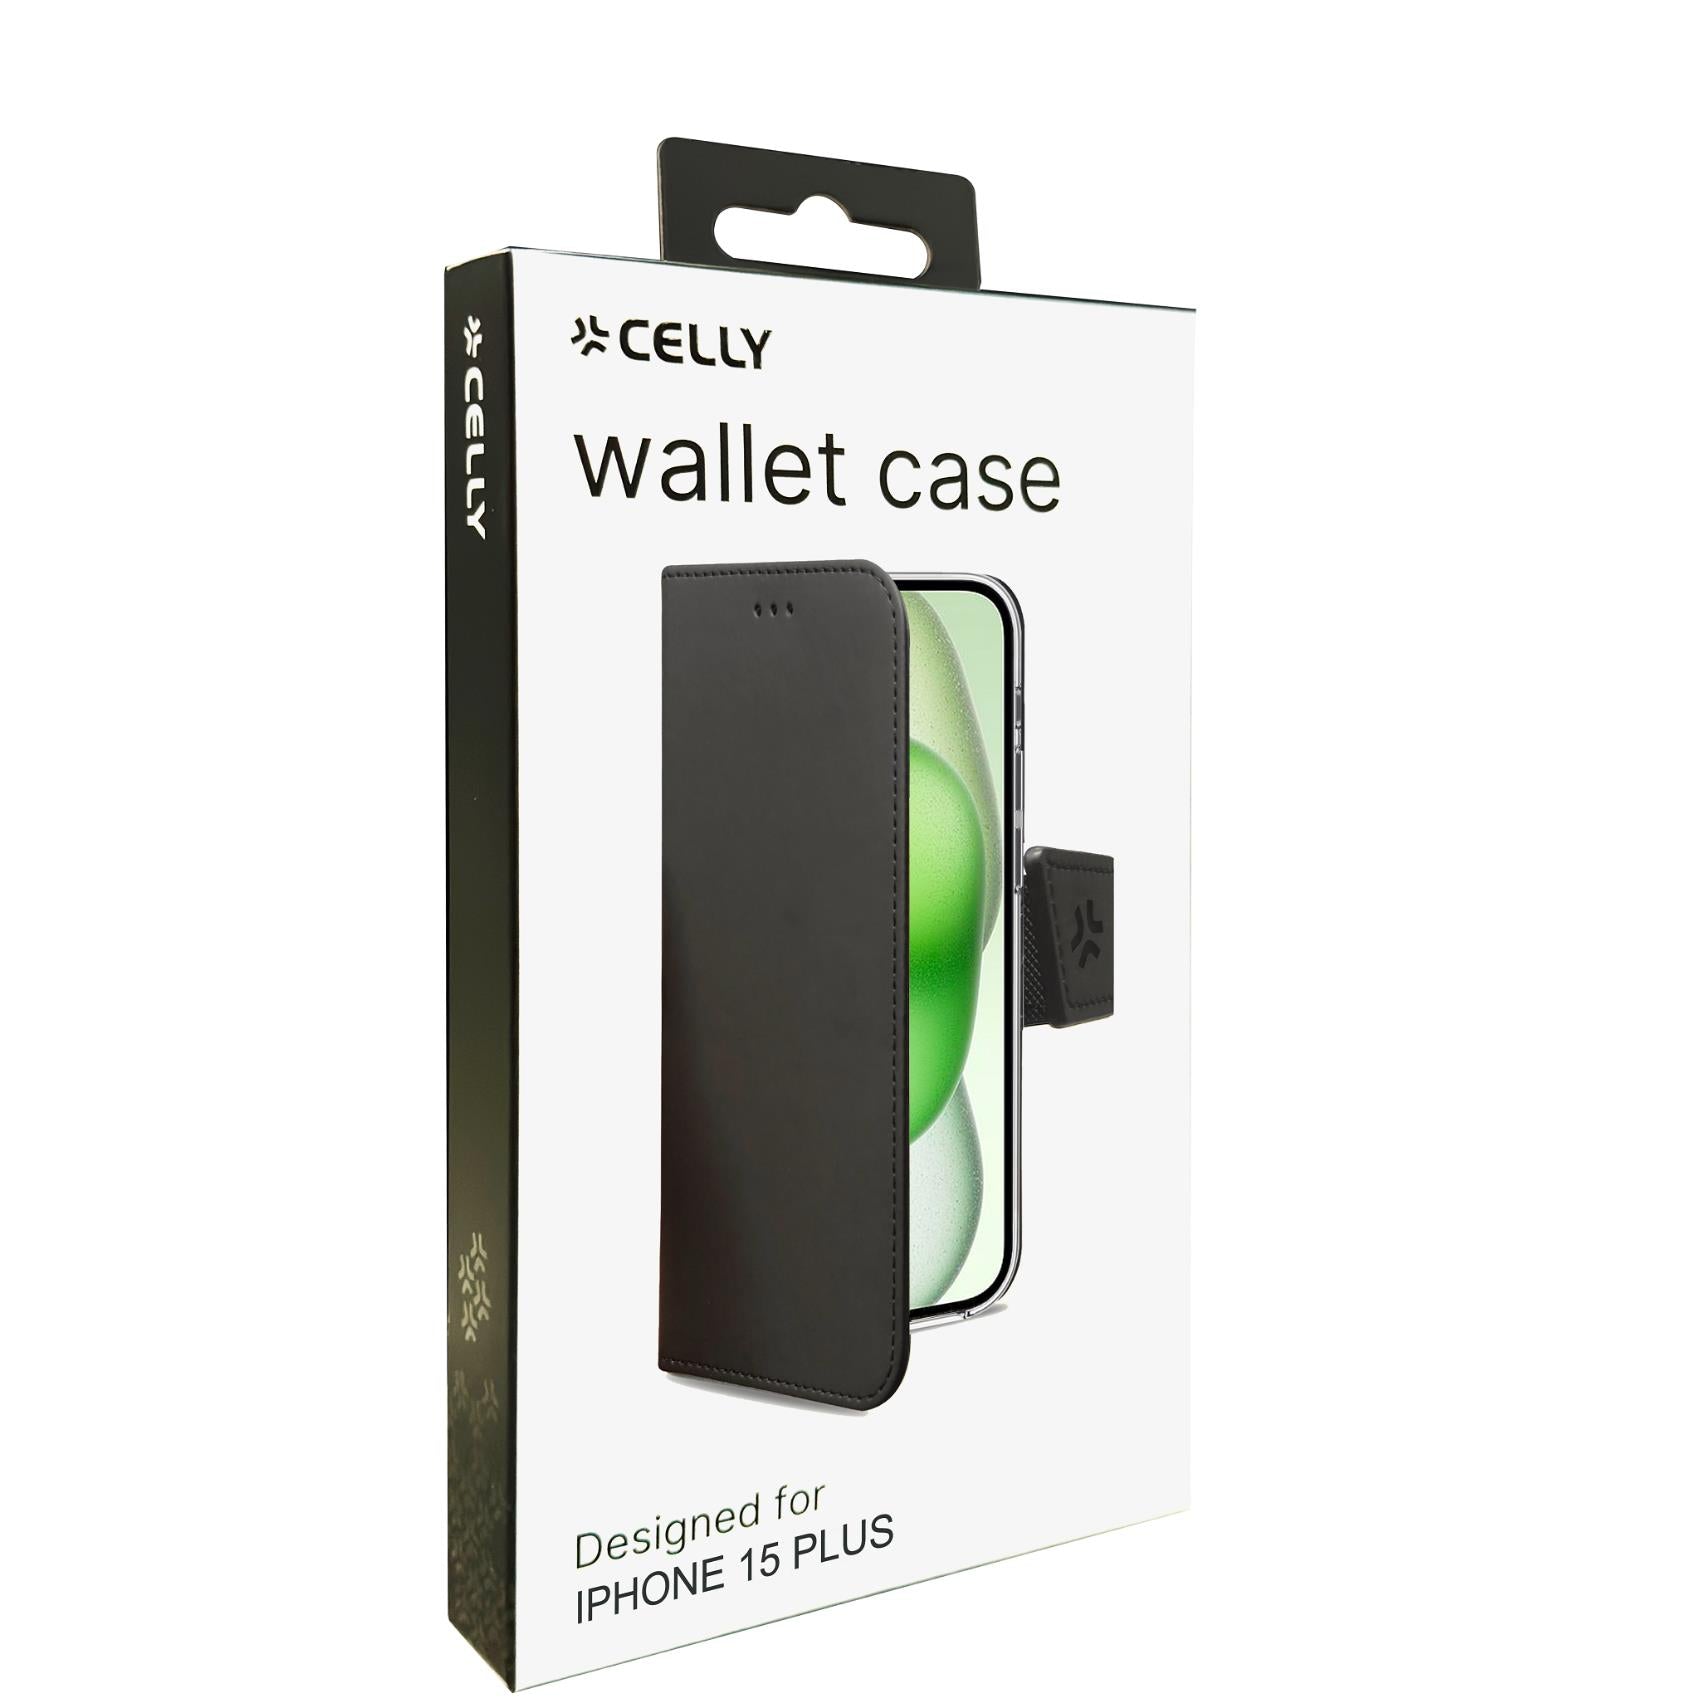 Celly WALLY CASE IPHONE 15 PLUS Black